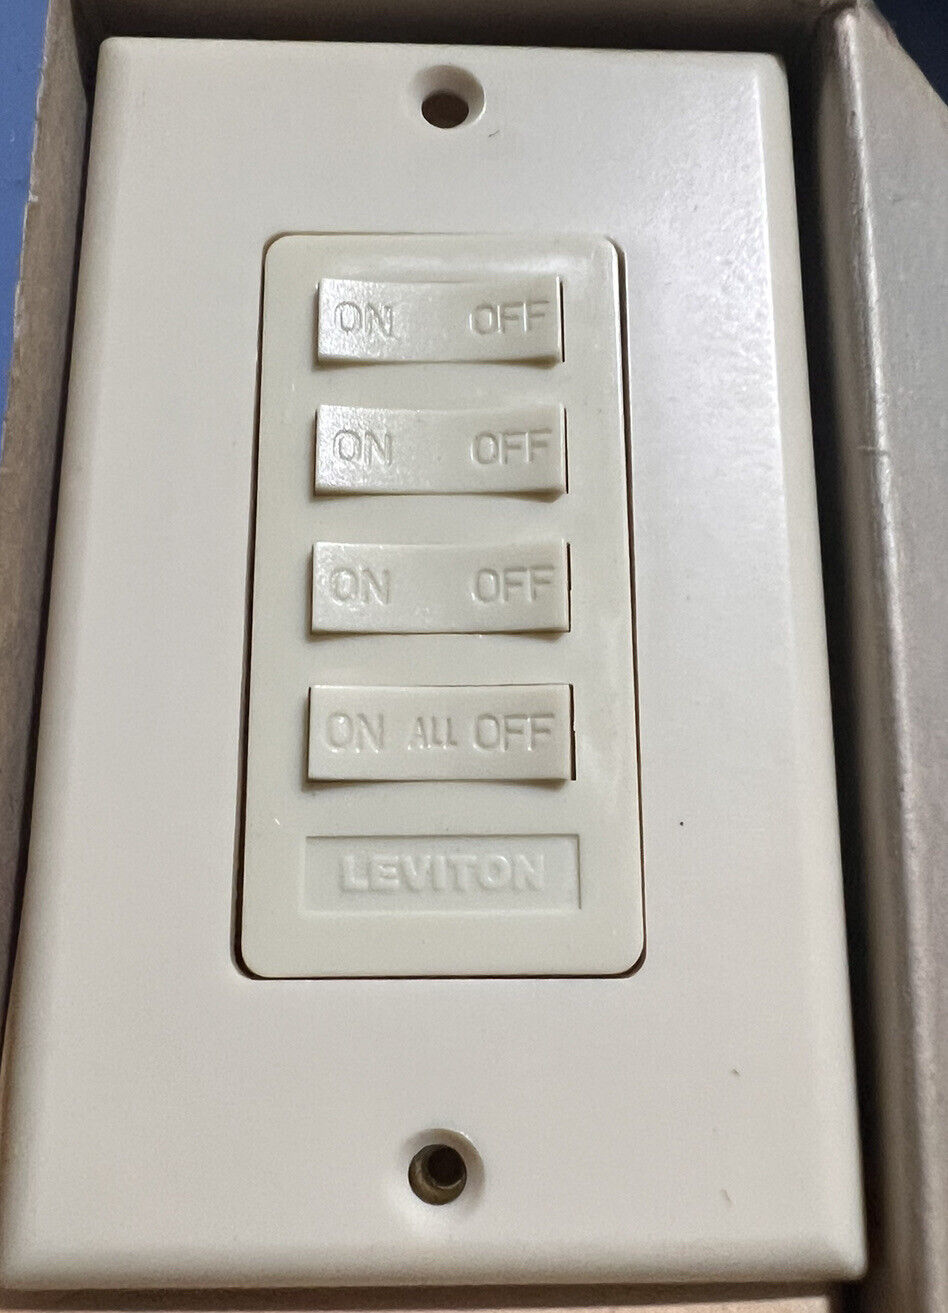 Leviton 6319-4A Area Electronic Controls Controller Ivory 3 On/Off 1 All On/Off